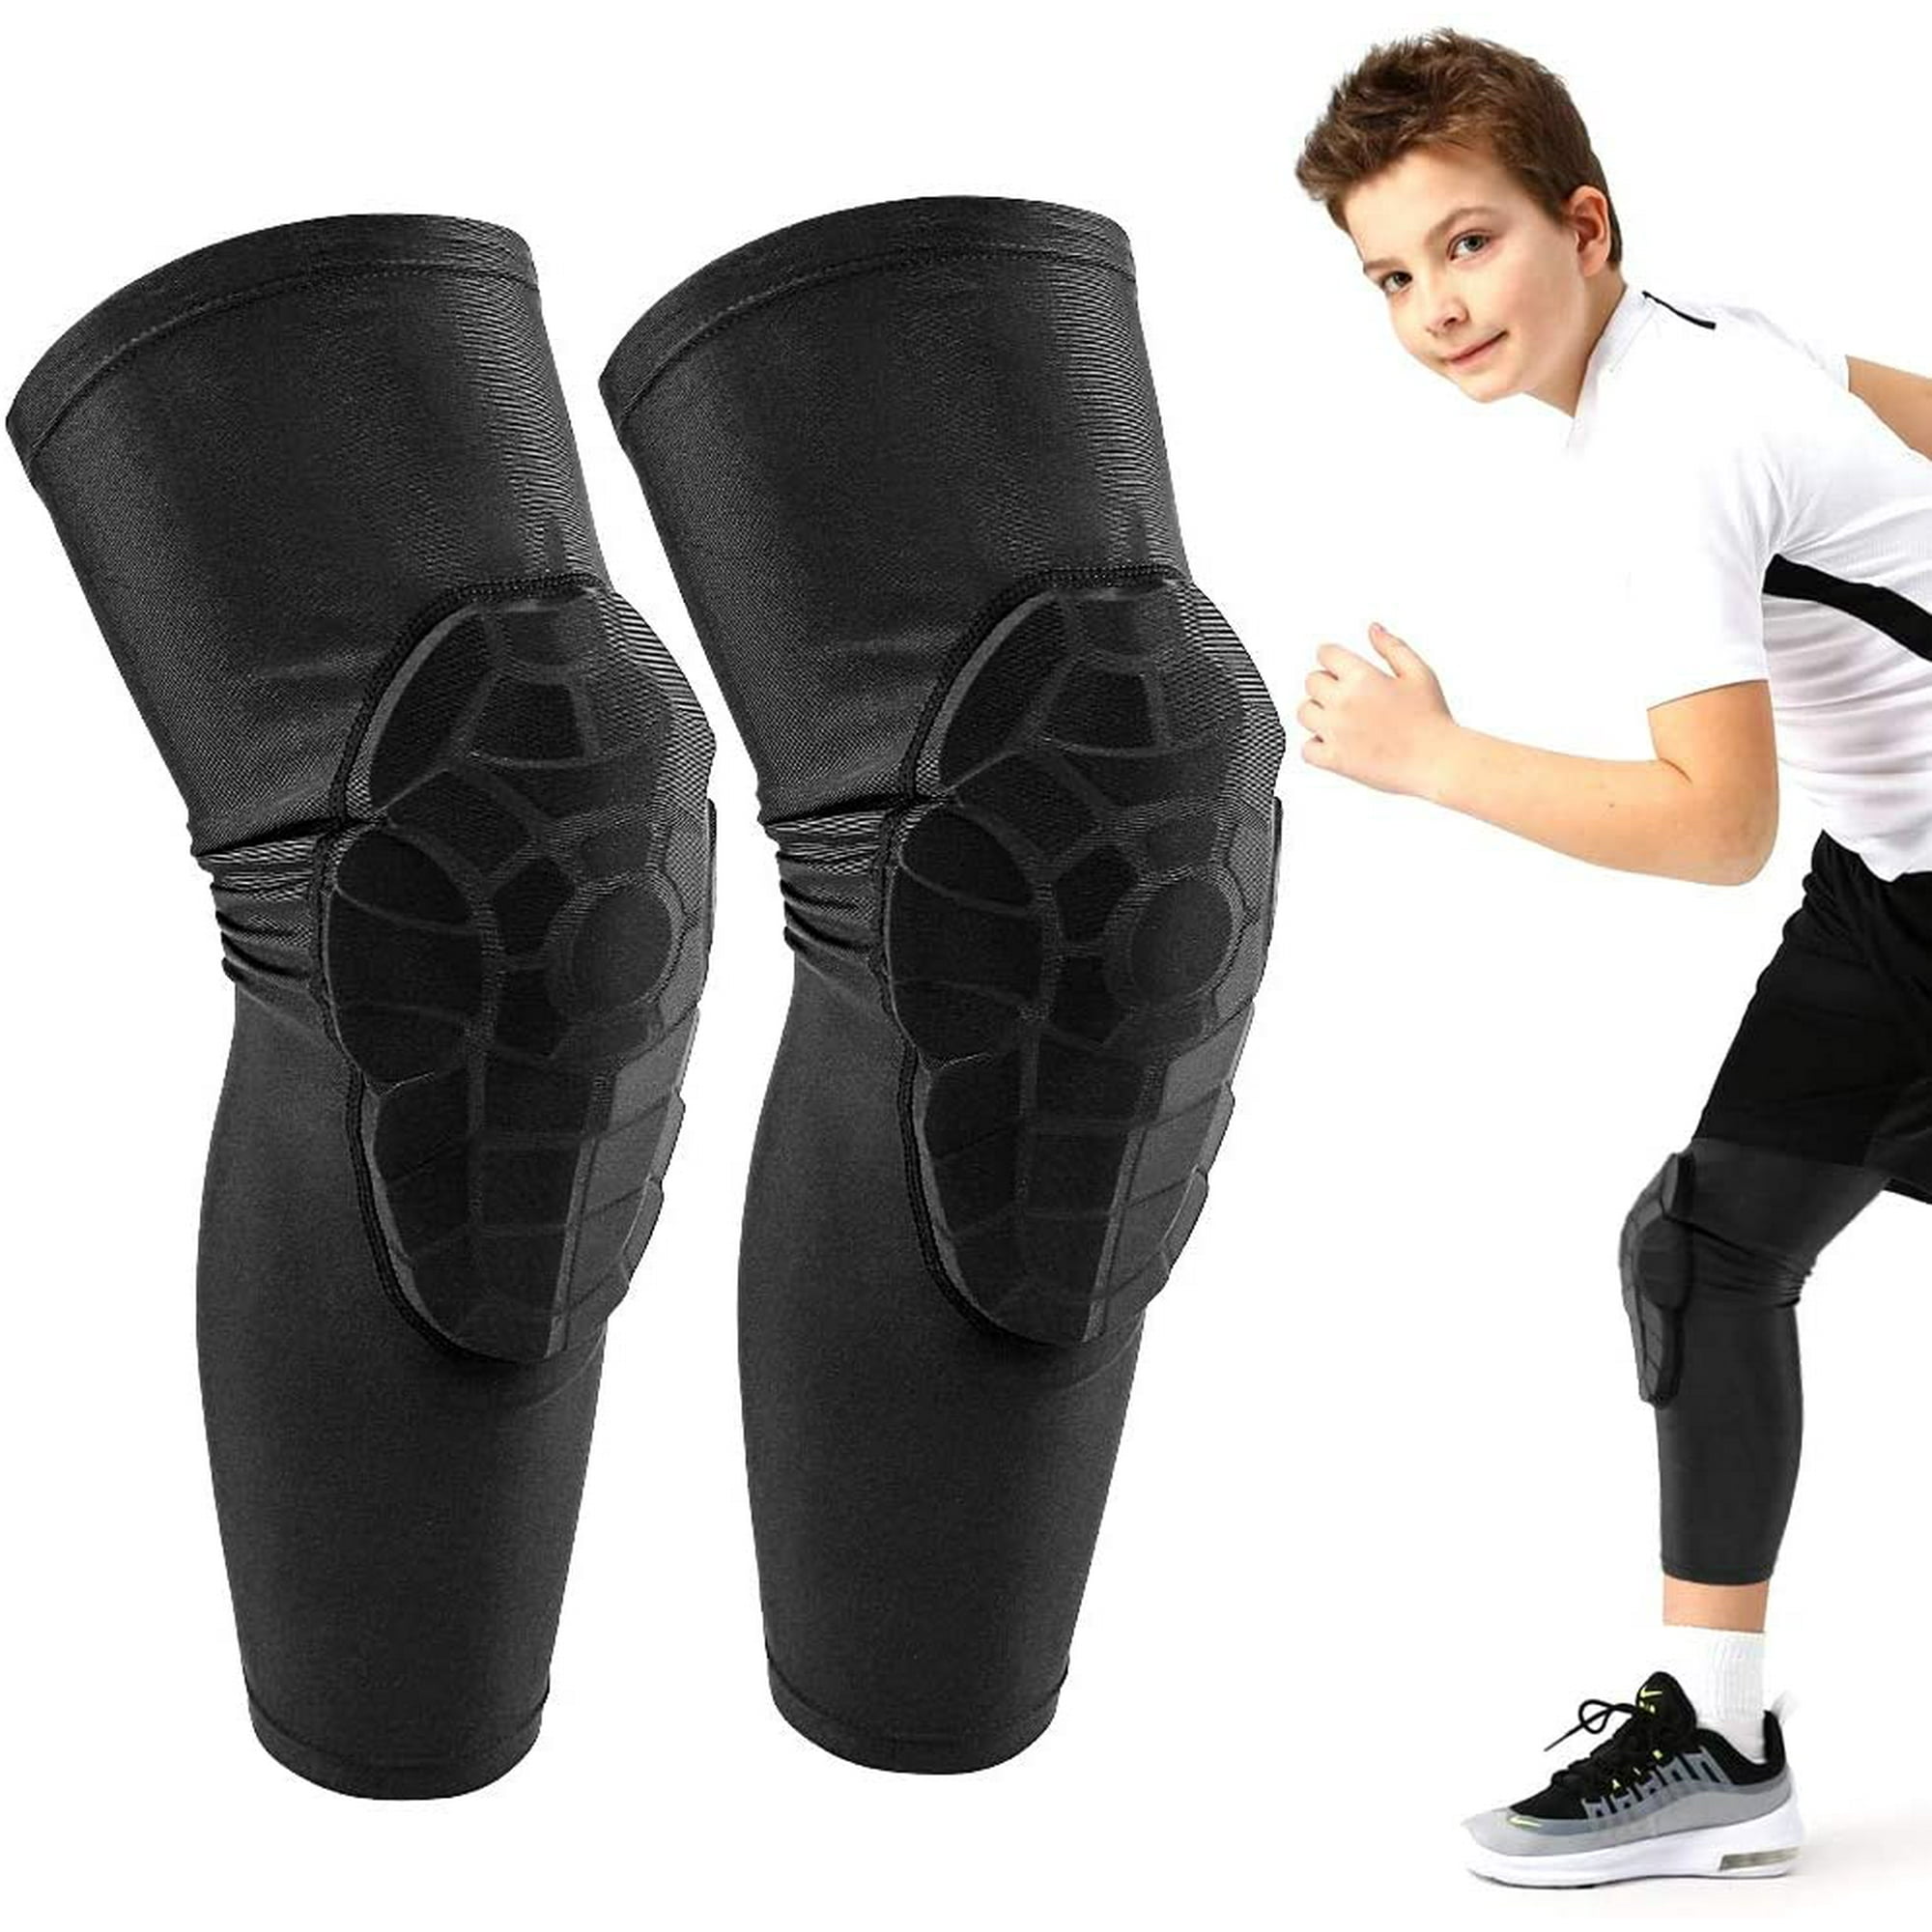 Knee Compression Pads,Basketball Knee Pads with Honeycomb Padding